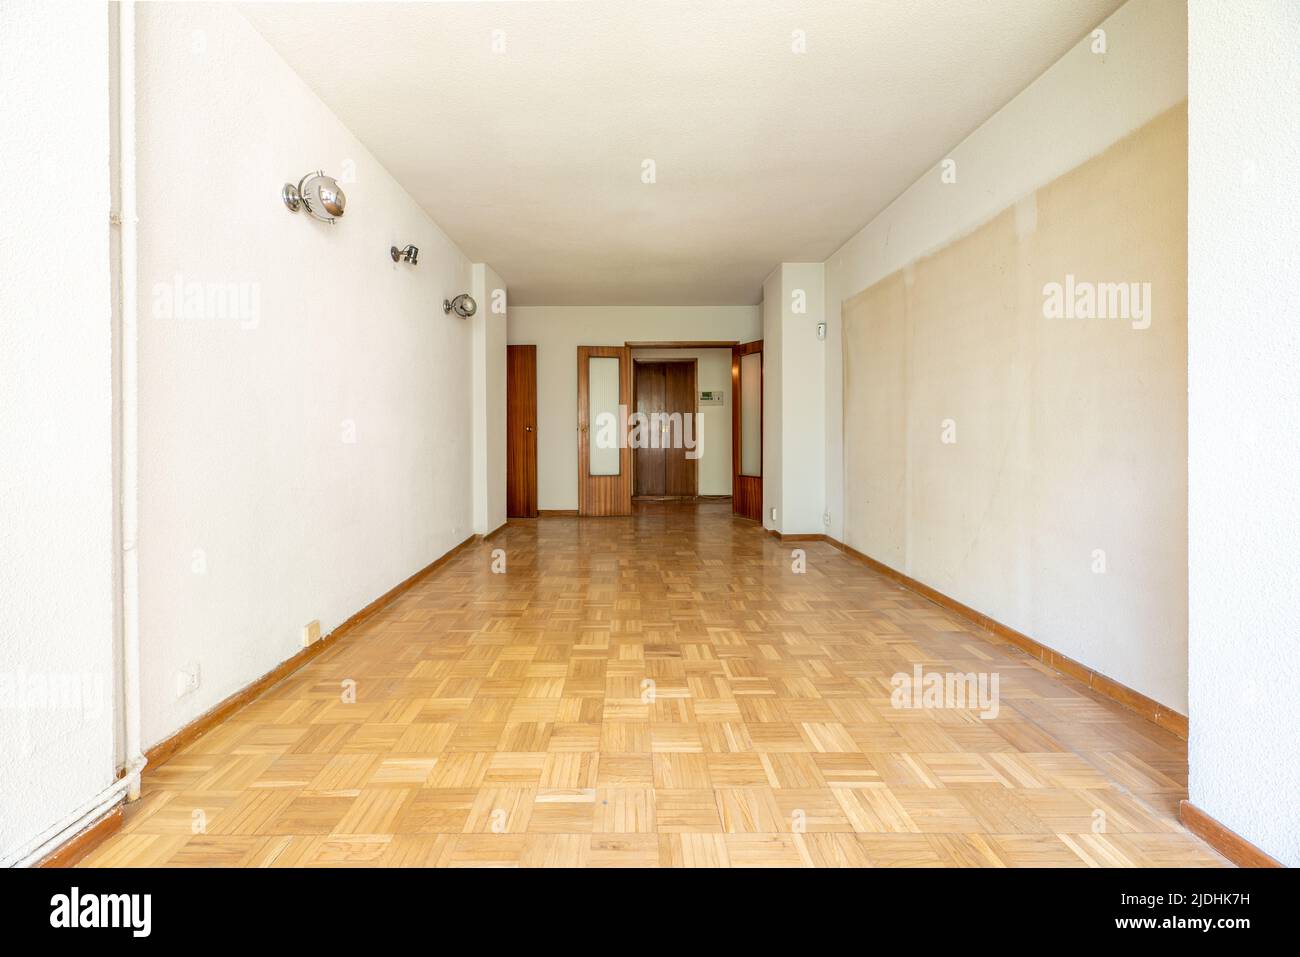 Empty room with oak parquet flooring, white painted walls and dark woodwork Stock Photo